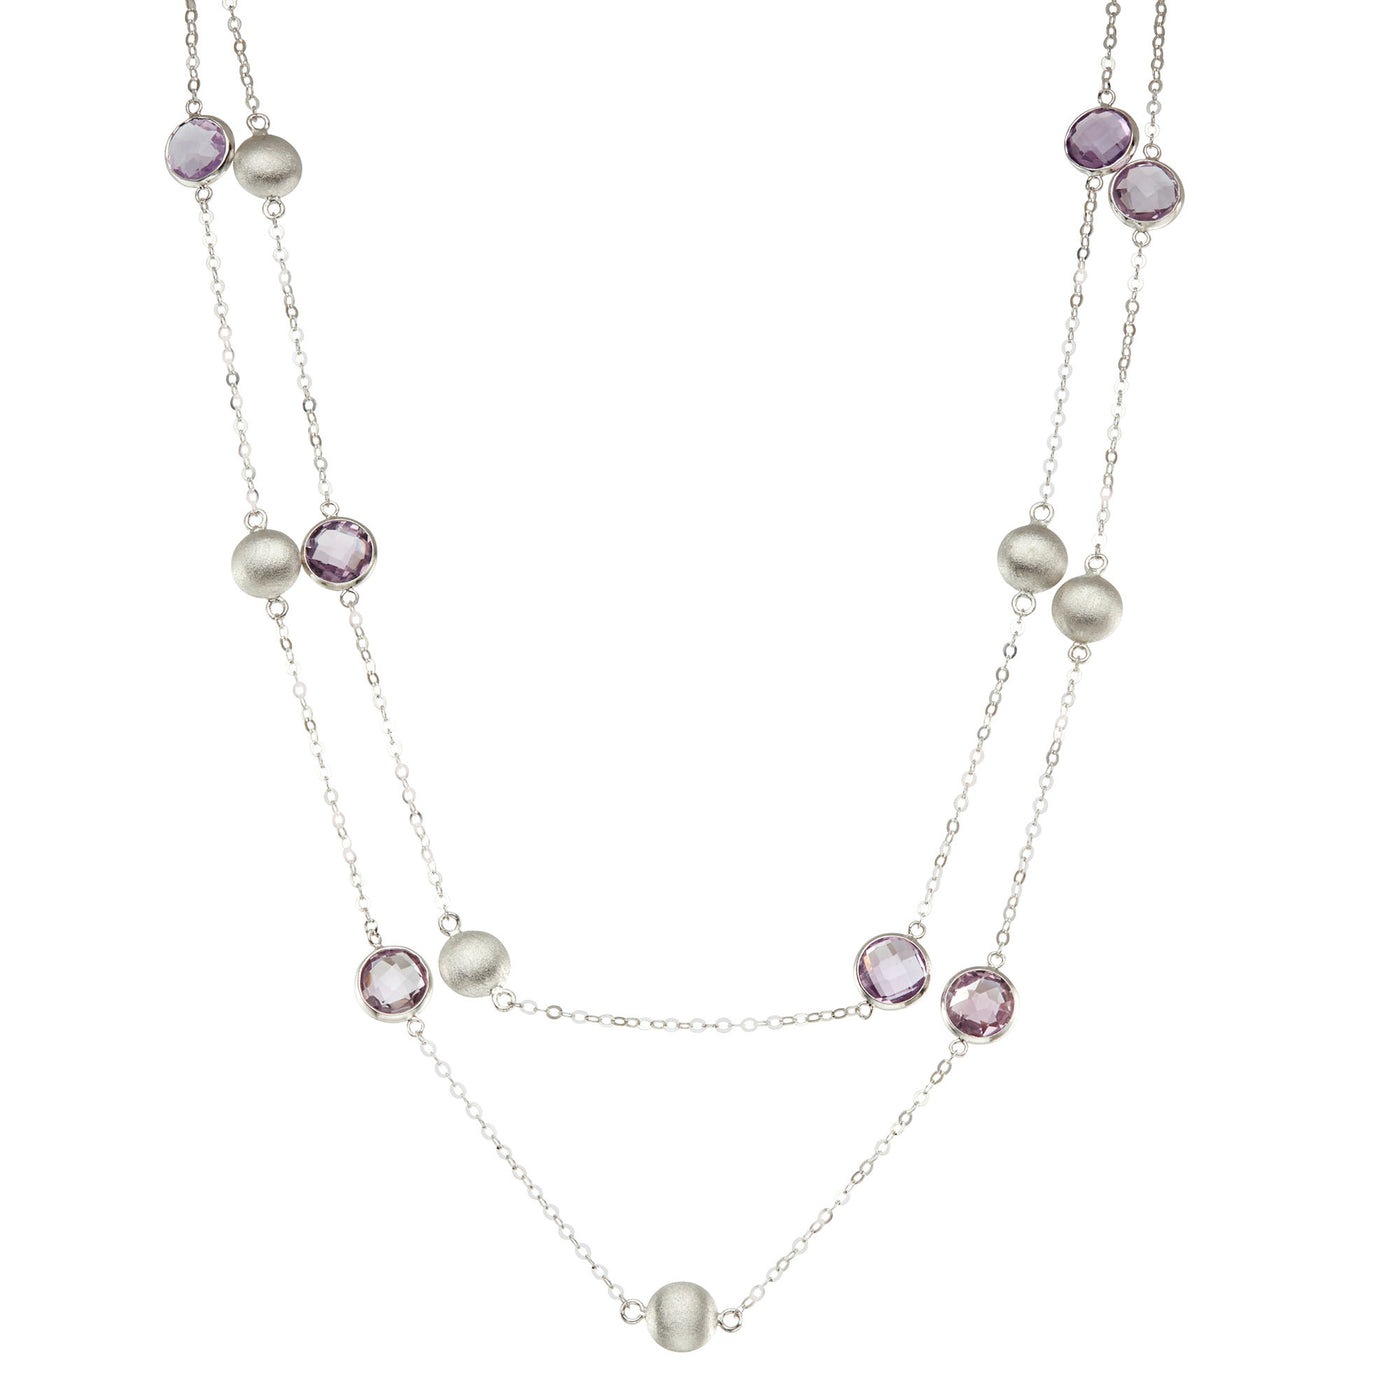 Rebecca Sloane Silver Bezel Station Necklace With Round Amethyst